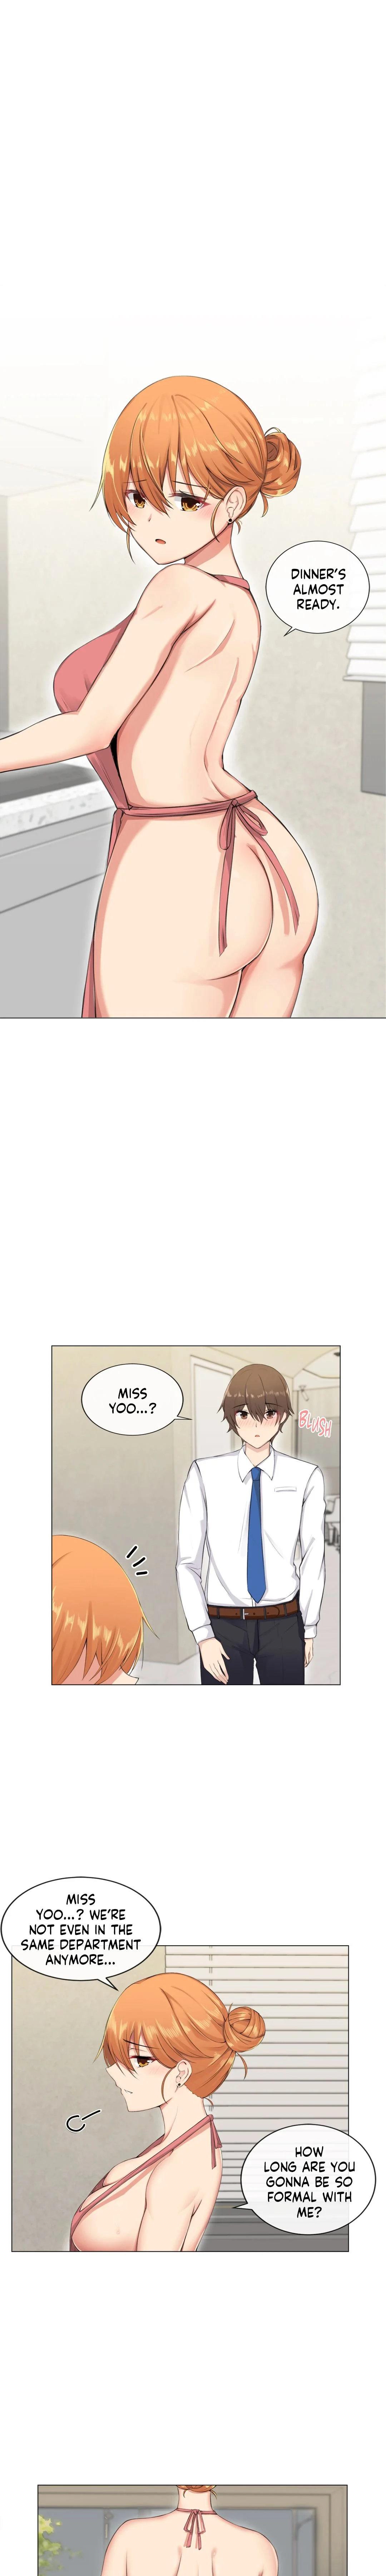 [Dumangoon, 130F] Sexcape Room: Pile Up Ch.9/9 [English] [Manhwa PDF] Completed 112